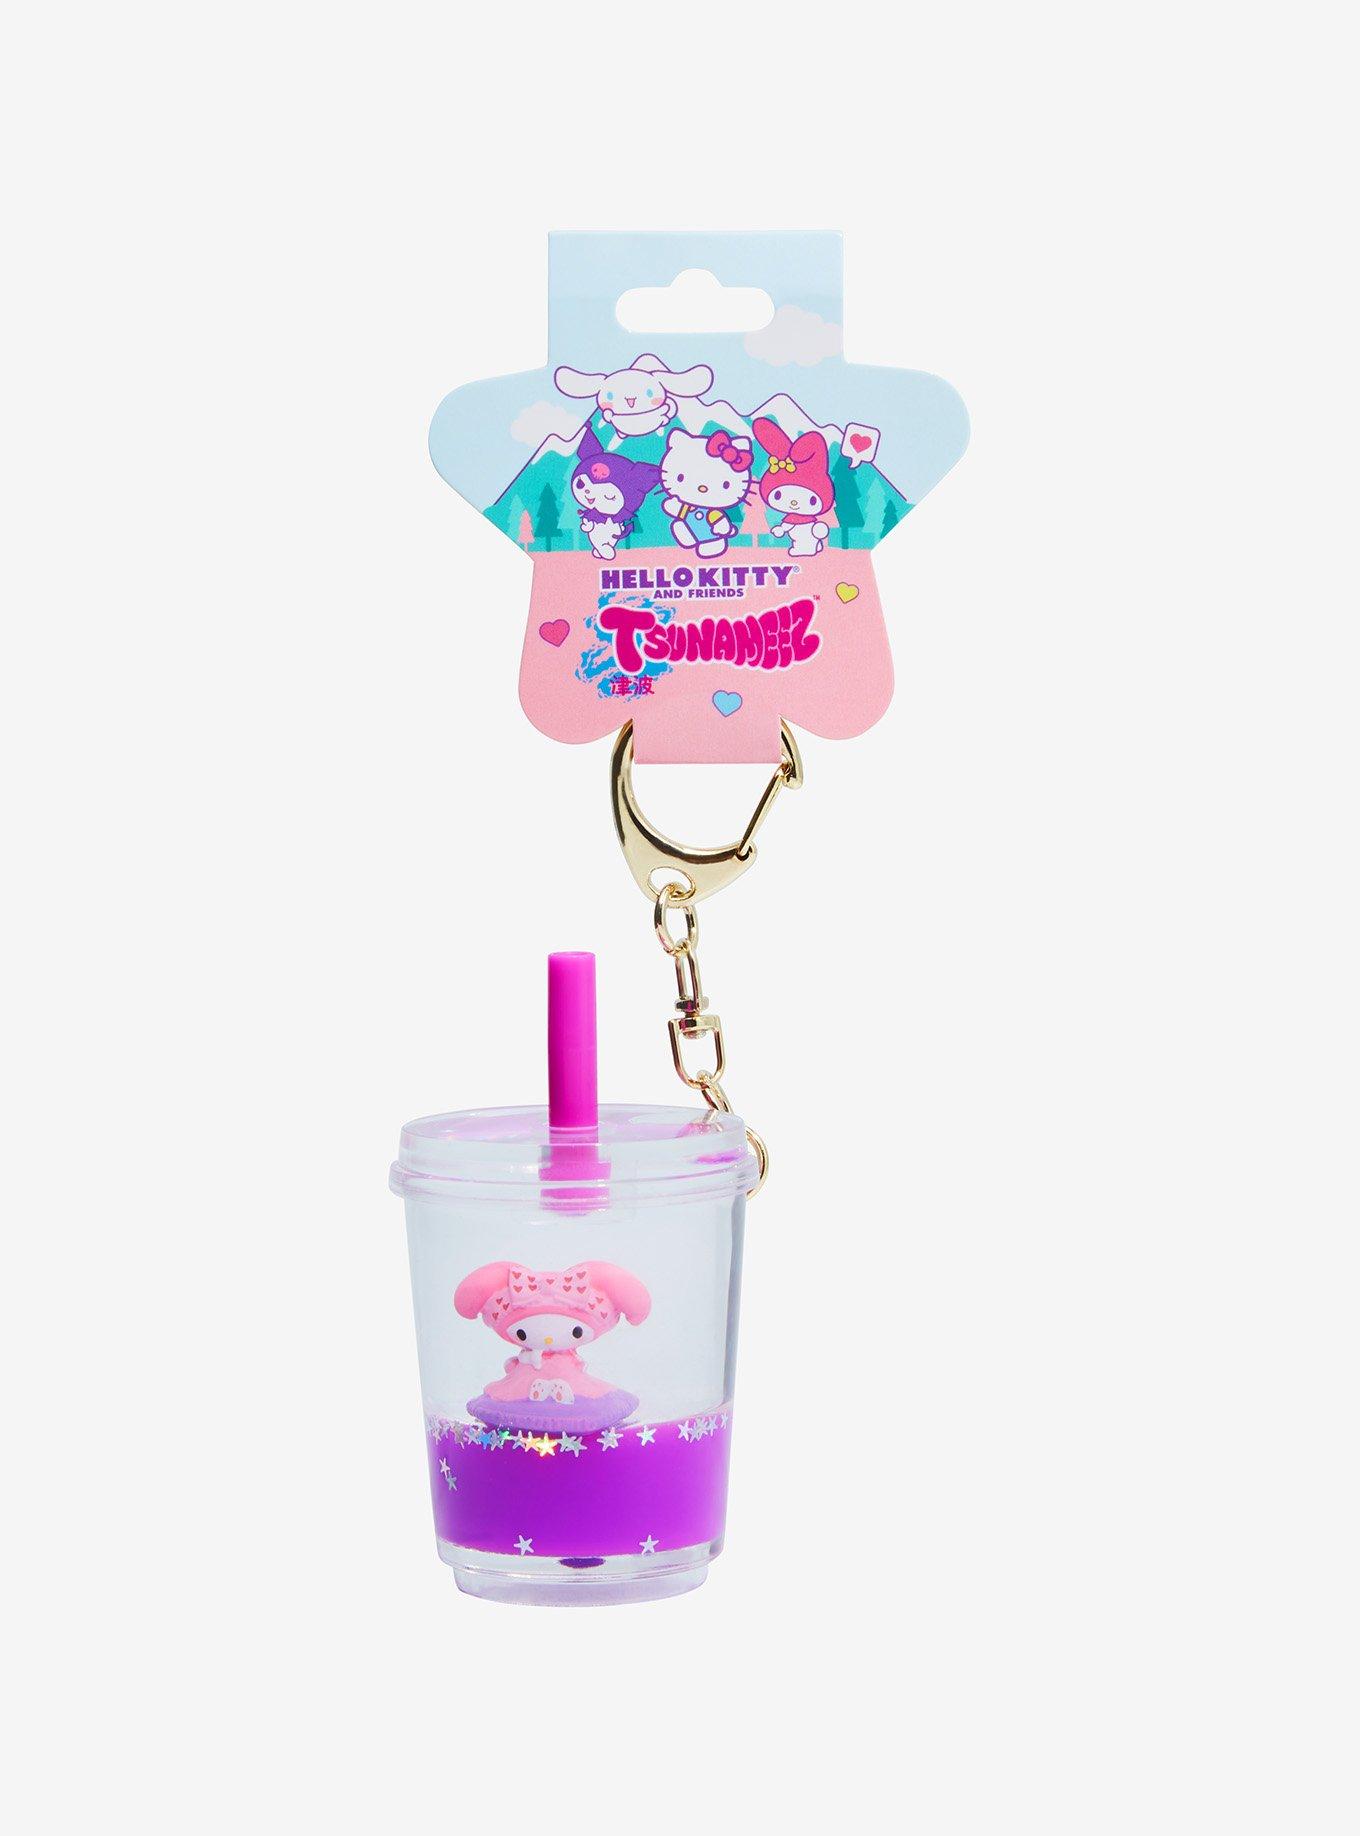 HELLO KITTY HAIR TIES ASSORTED COLORS IMPRINTED & KEYRING SUPER CUTE!!